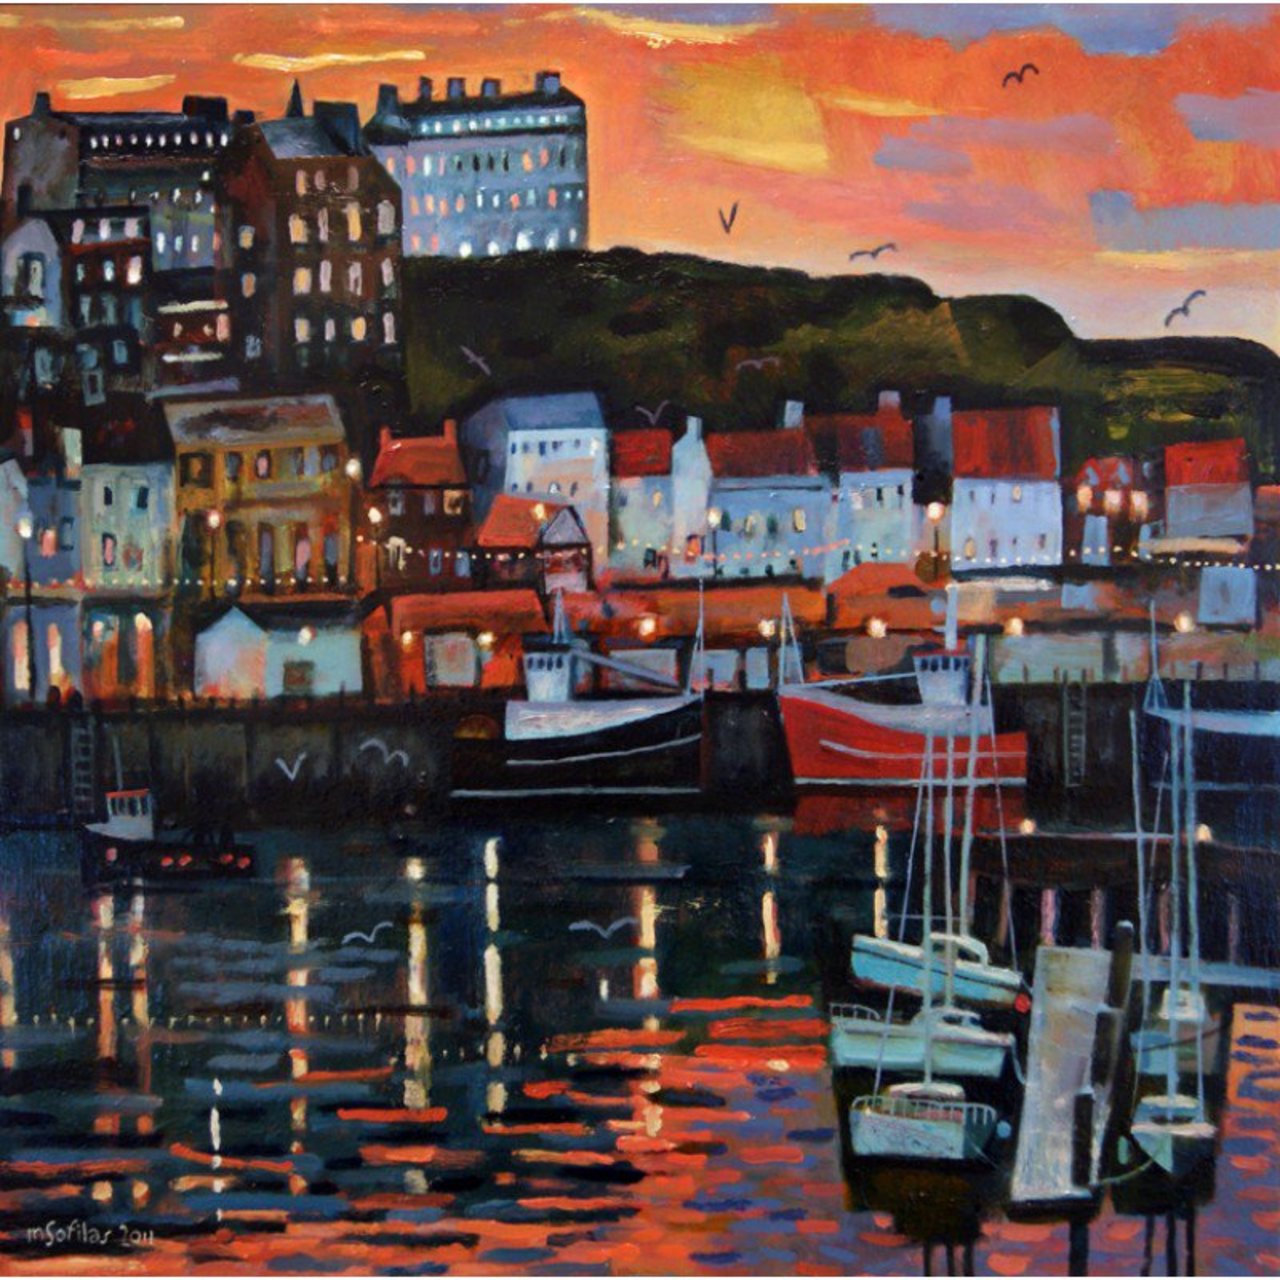 Whitby Harbour - A time to reflect by Mark Sofilas http://bit.ly/1YjG0XI #Art #NorthYorkshire https://t.co/Ovvci1LEPq